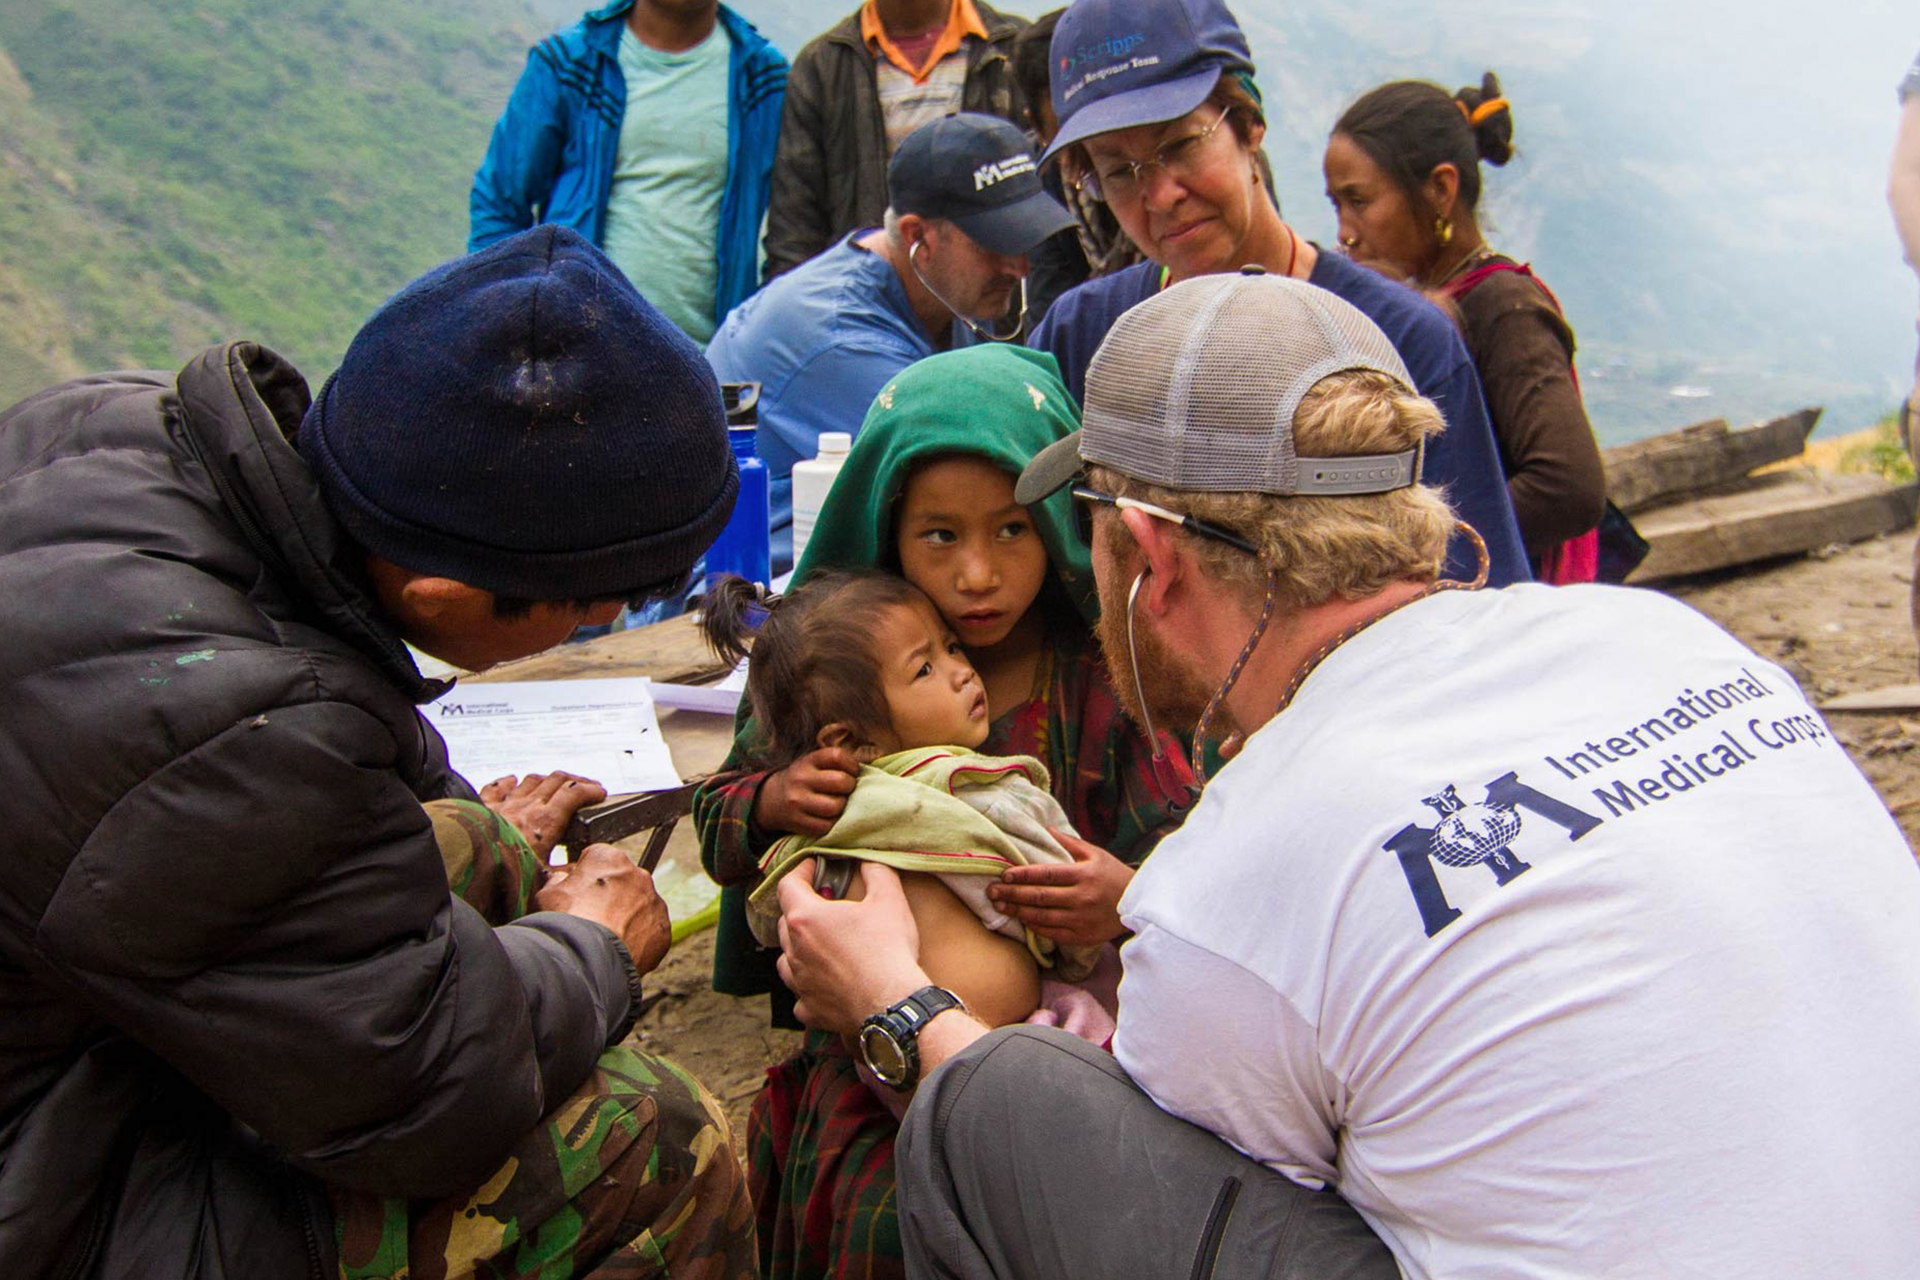 Photo of a doctor with an International Medical Corps Tshirt examining a child